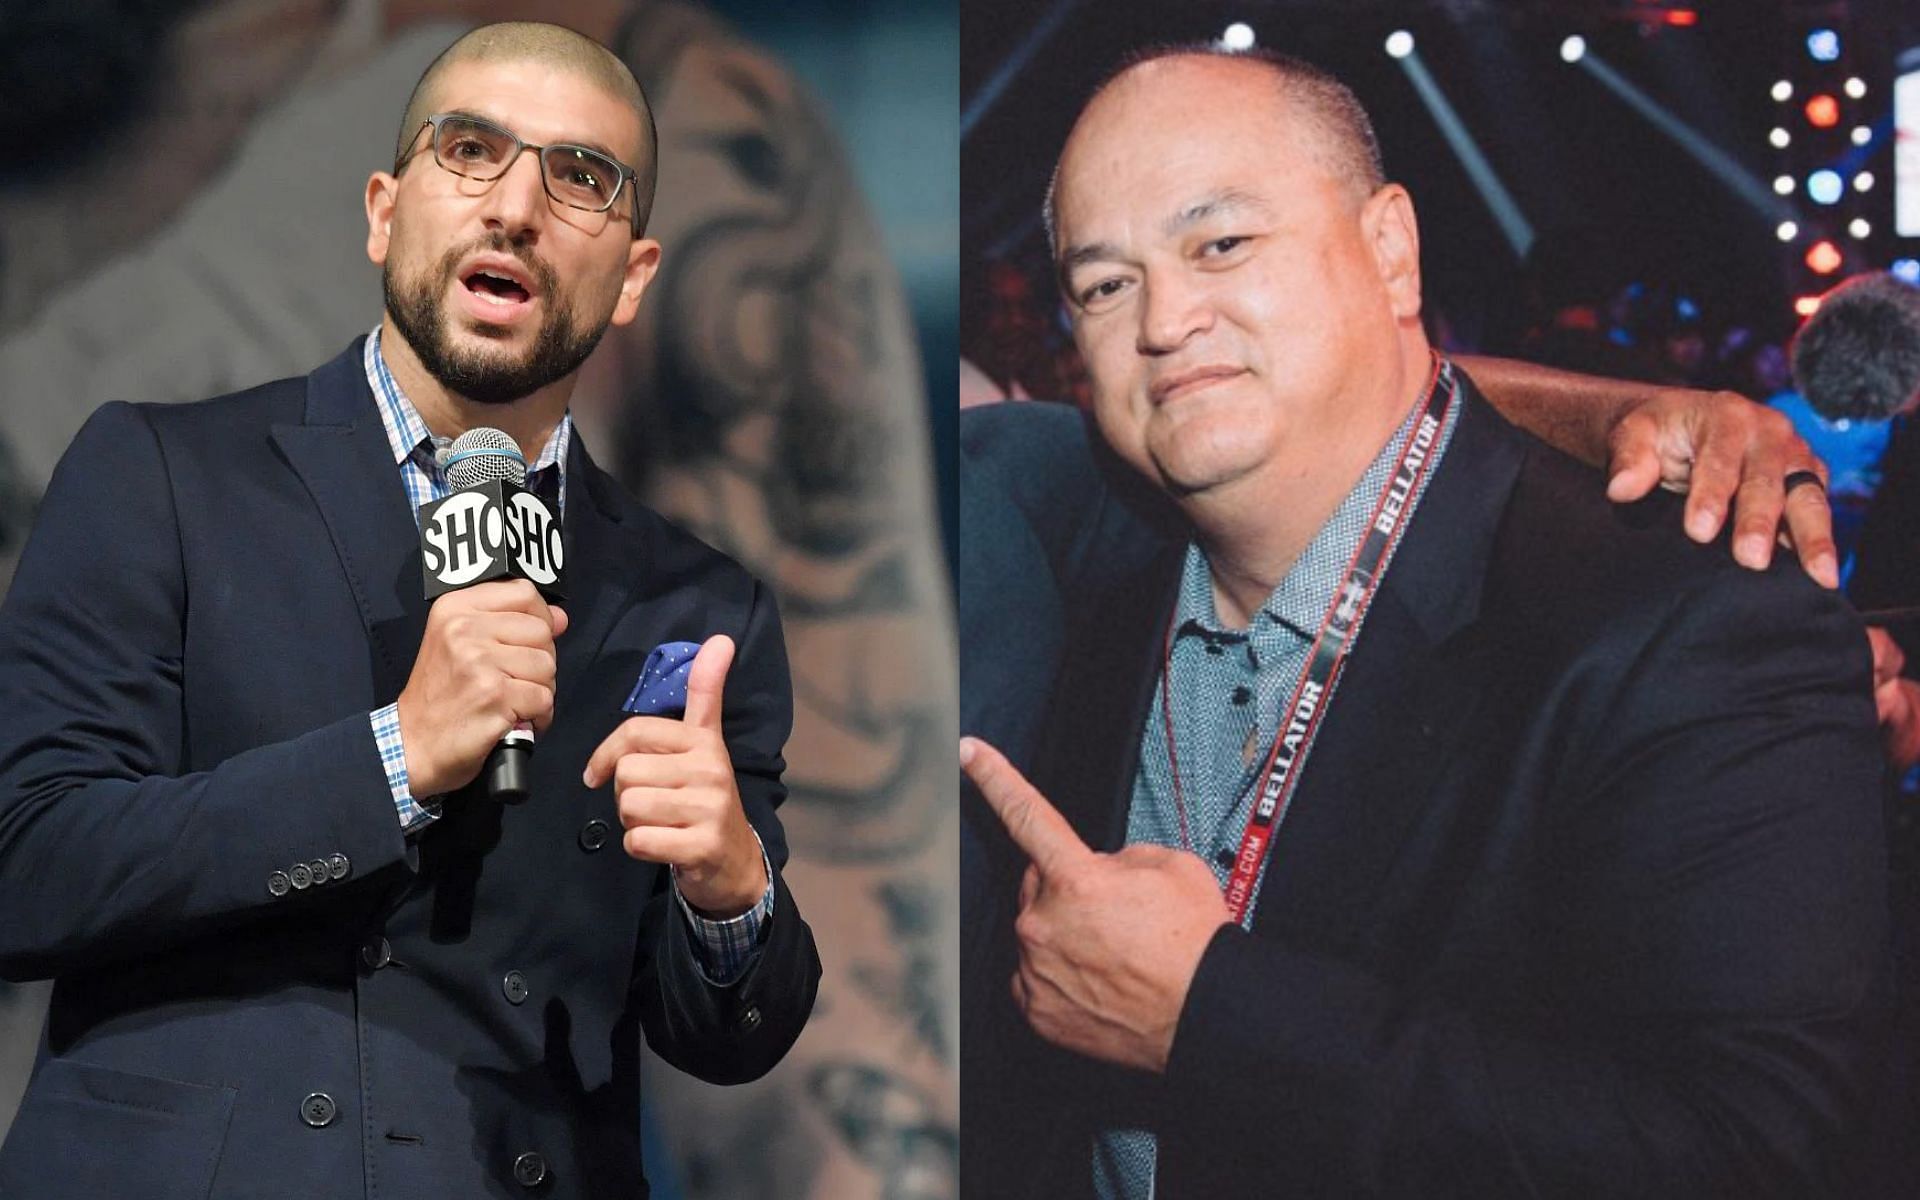 Ariel Helwani (left) and Scott Coker (right)[Image courtesy: @therealscottcoker on Instagram]